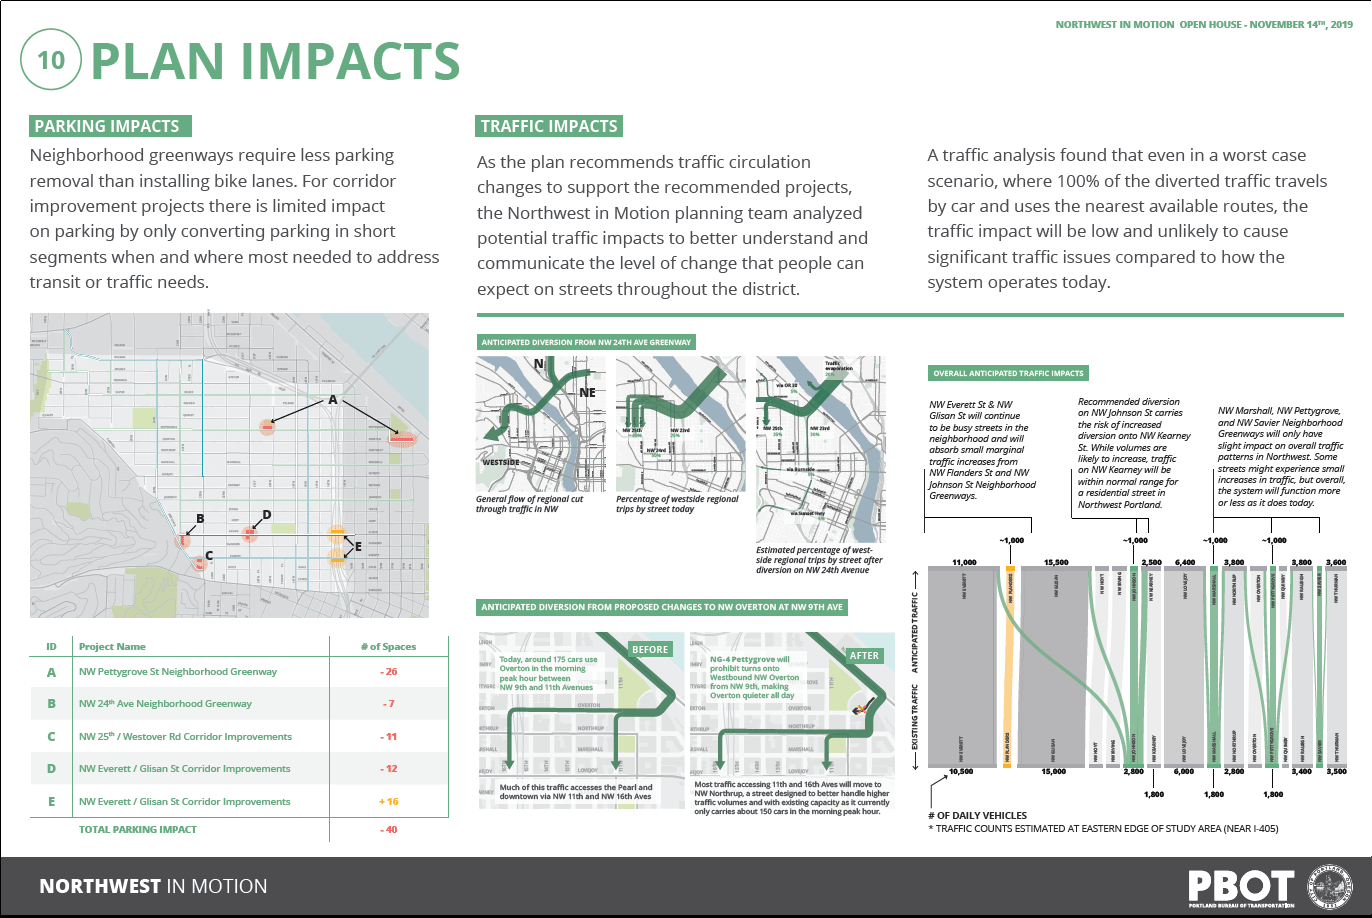 Board shows: A series of 6 diagrams show the flows of traffic based on the impacts from the diverted traffic. A map shows the locations of parking impacts in the northwest neighborhood. In total, this project would require the removal of 40 parking spaces throughout the neighborhood.